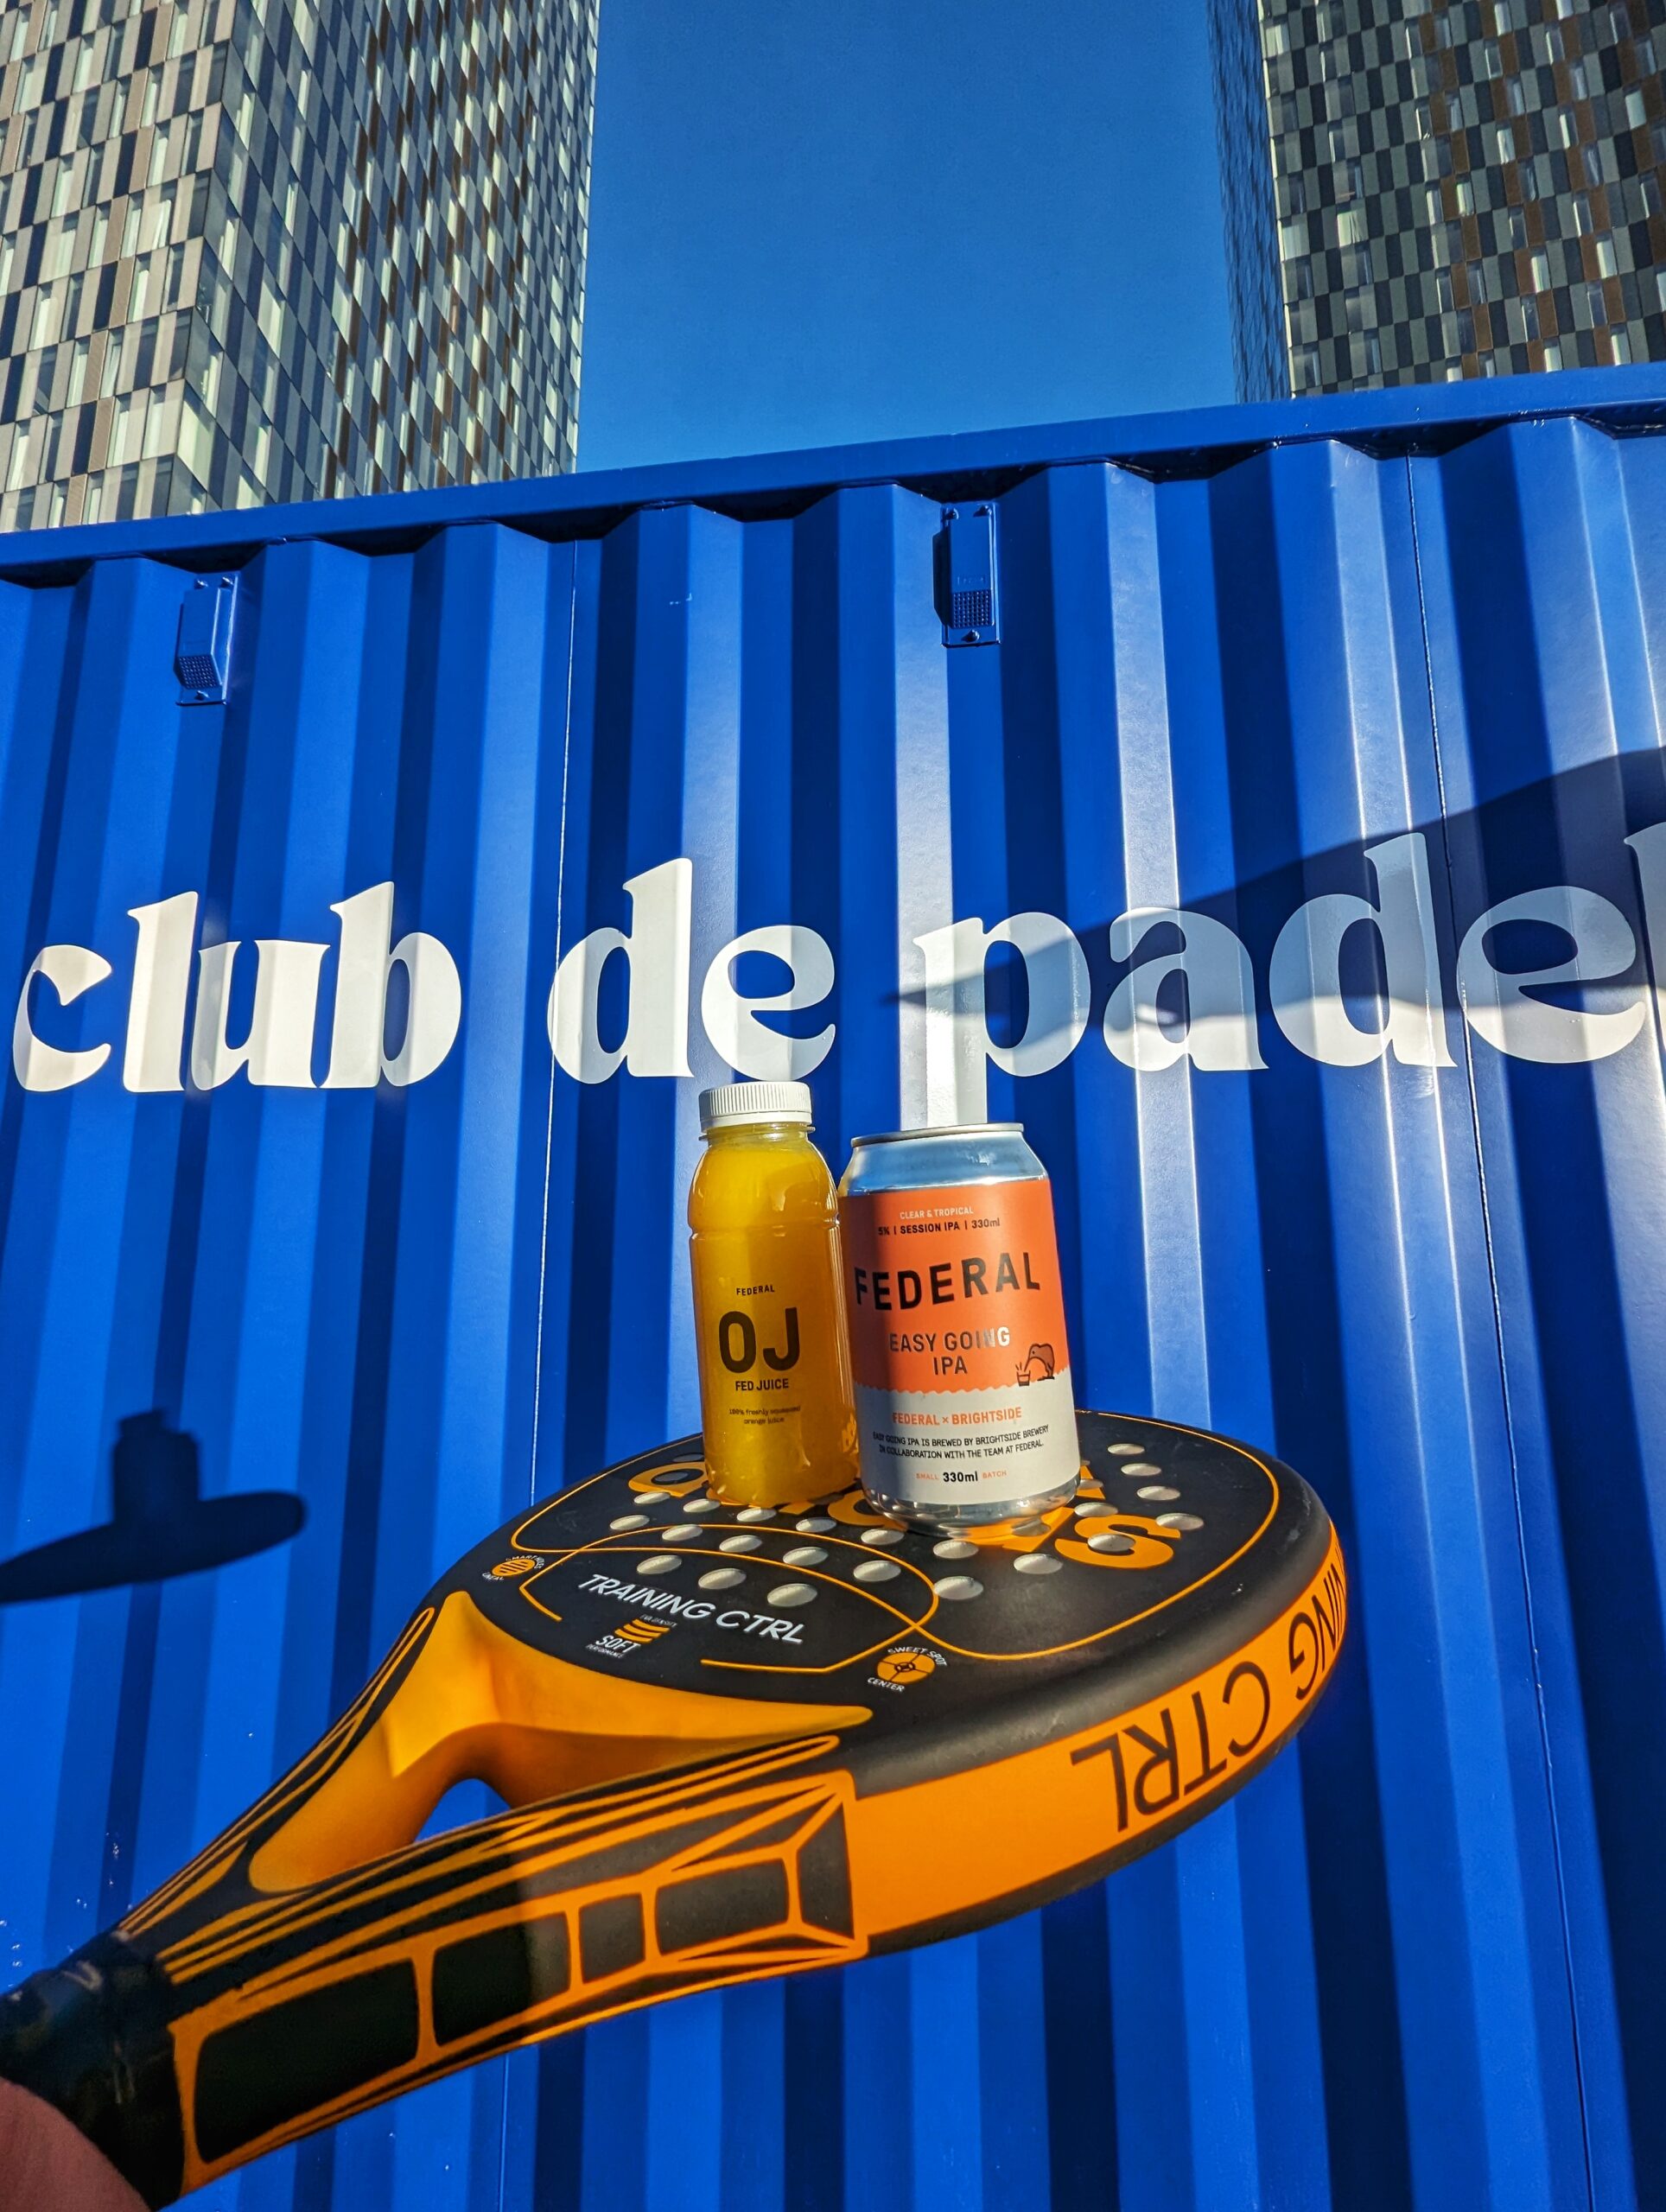 Federal at Club de Padel in Manchester